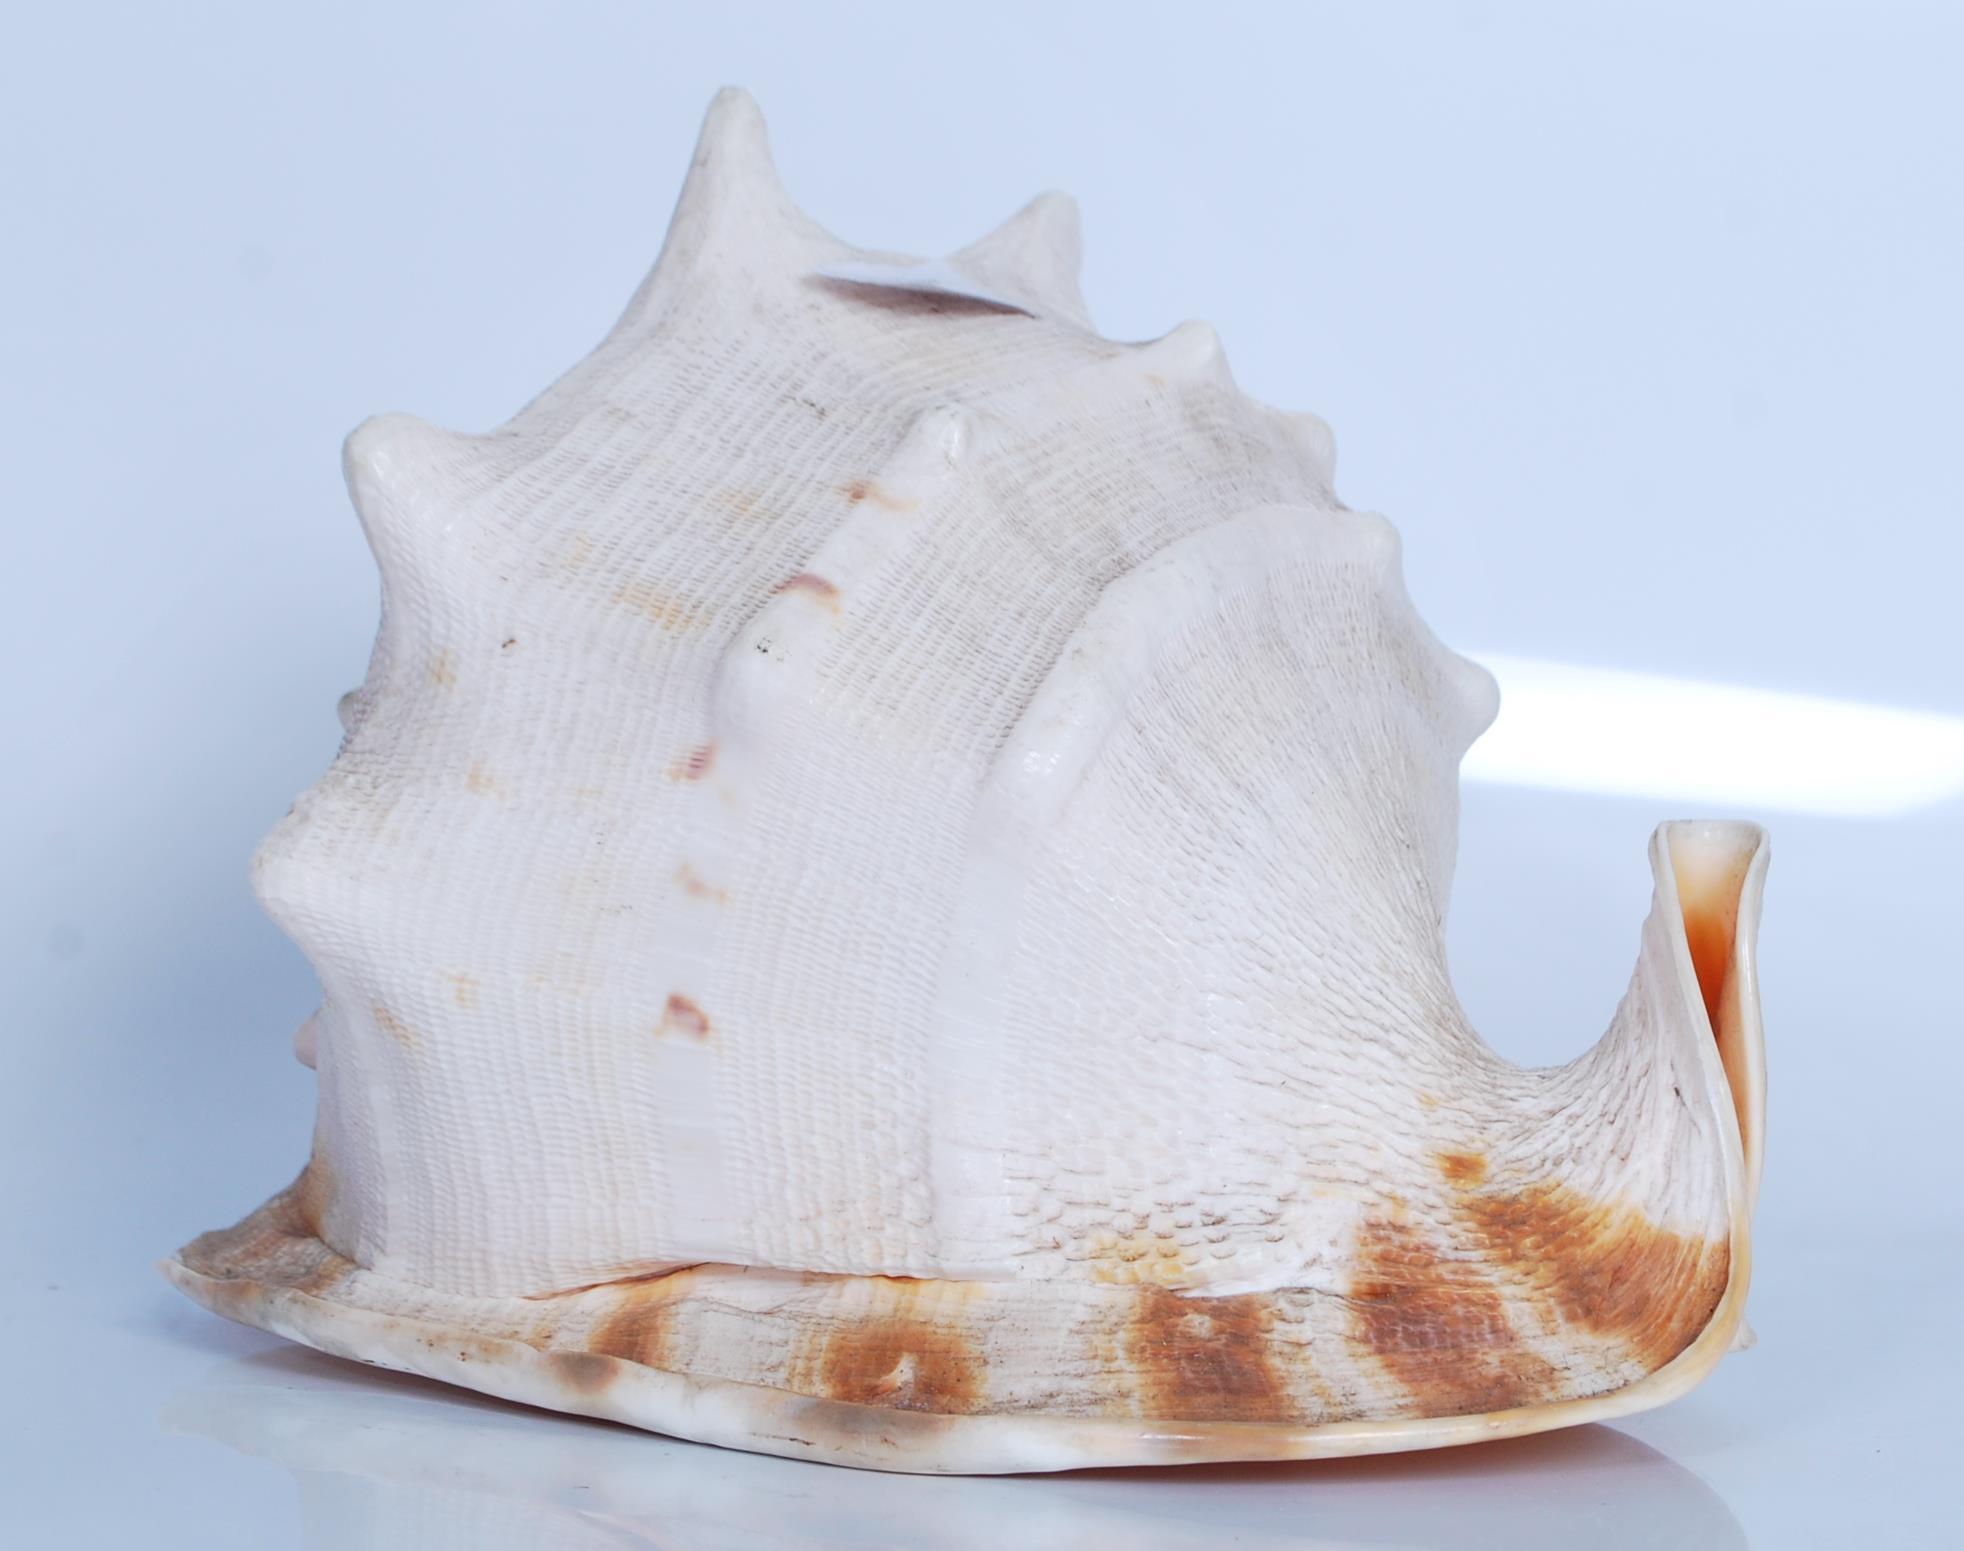 Strombus (Gigas) Lobatus; a Giant Conch shell meas